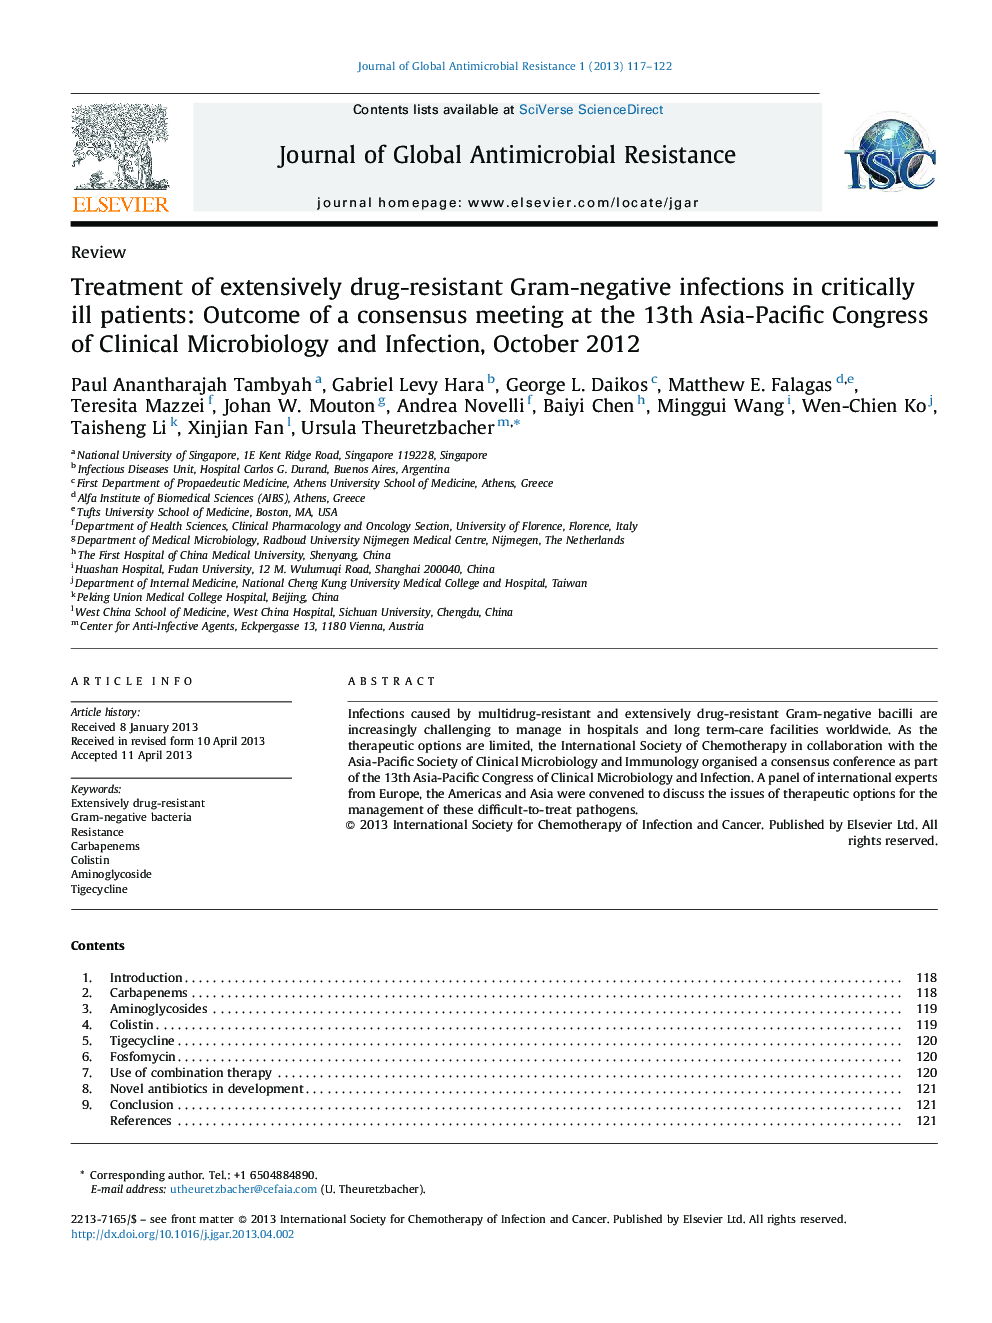 Treatment of extensively drug-resistant Gram-negative infections in critically ill patients: Outcome of a consensus meeting at the 13th Asia-Pacific Congress of Clinical Microbiology and Infection, October 2012